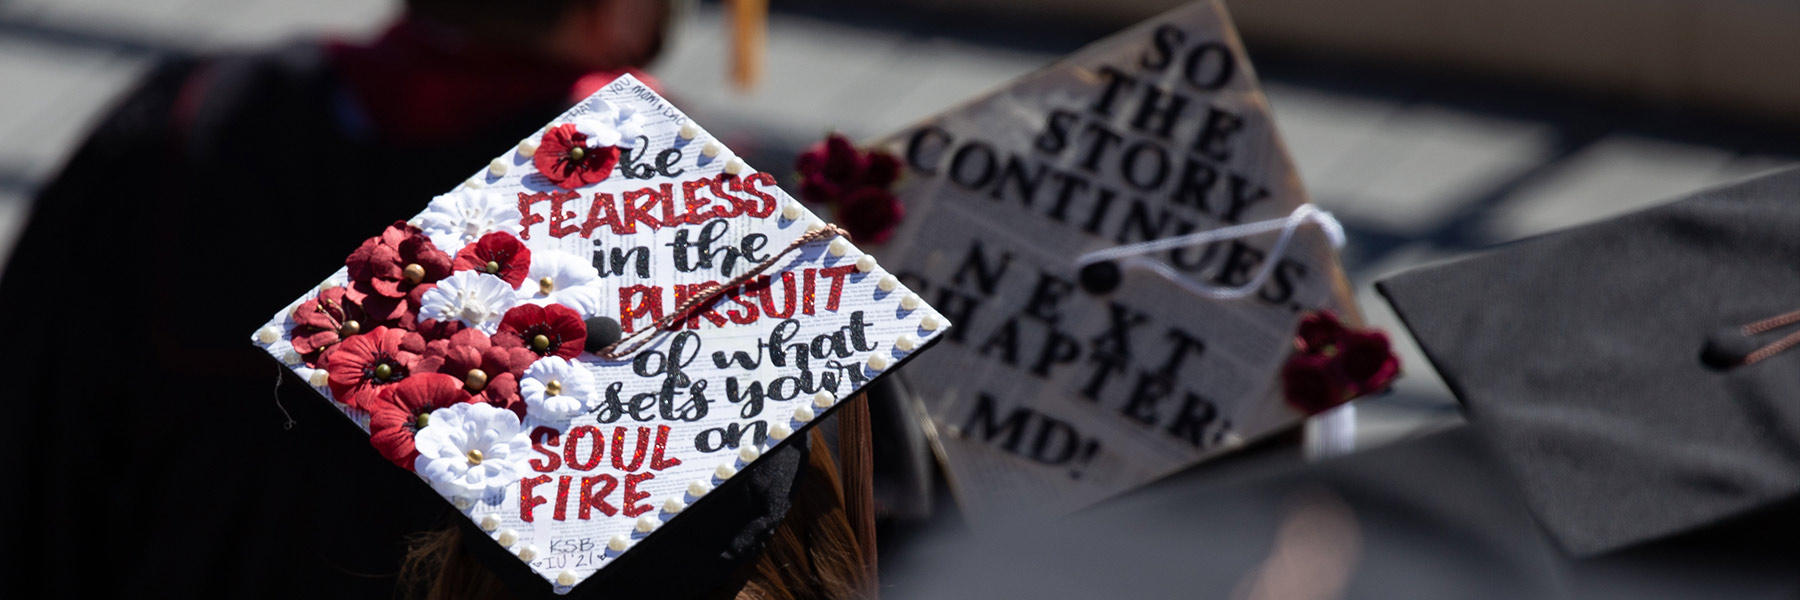 Graduate seen from behind with mortarboard decorated with red and white flowers and decorative writing that says: Be fearless in the pursuit of what sets your soul on fire.